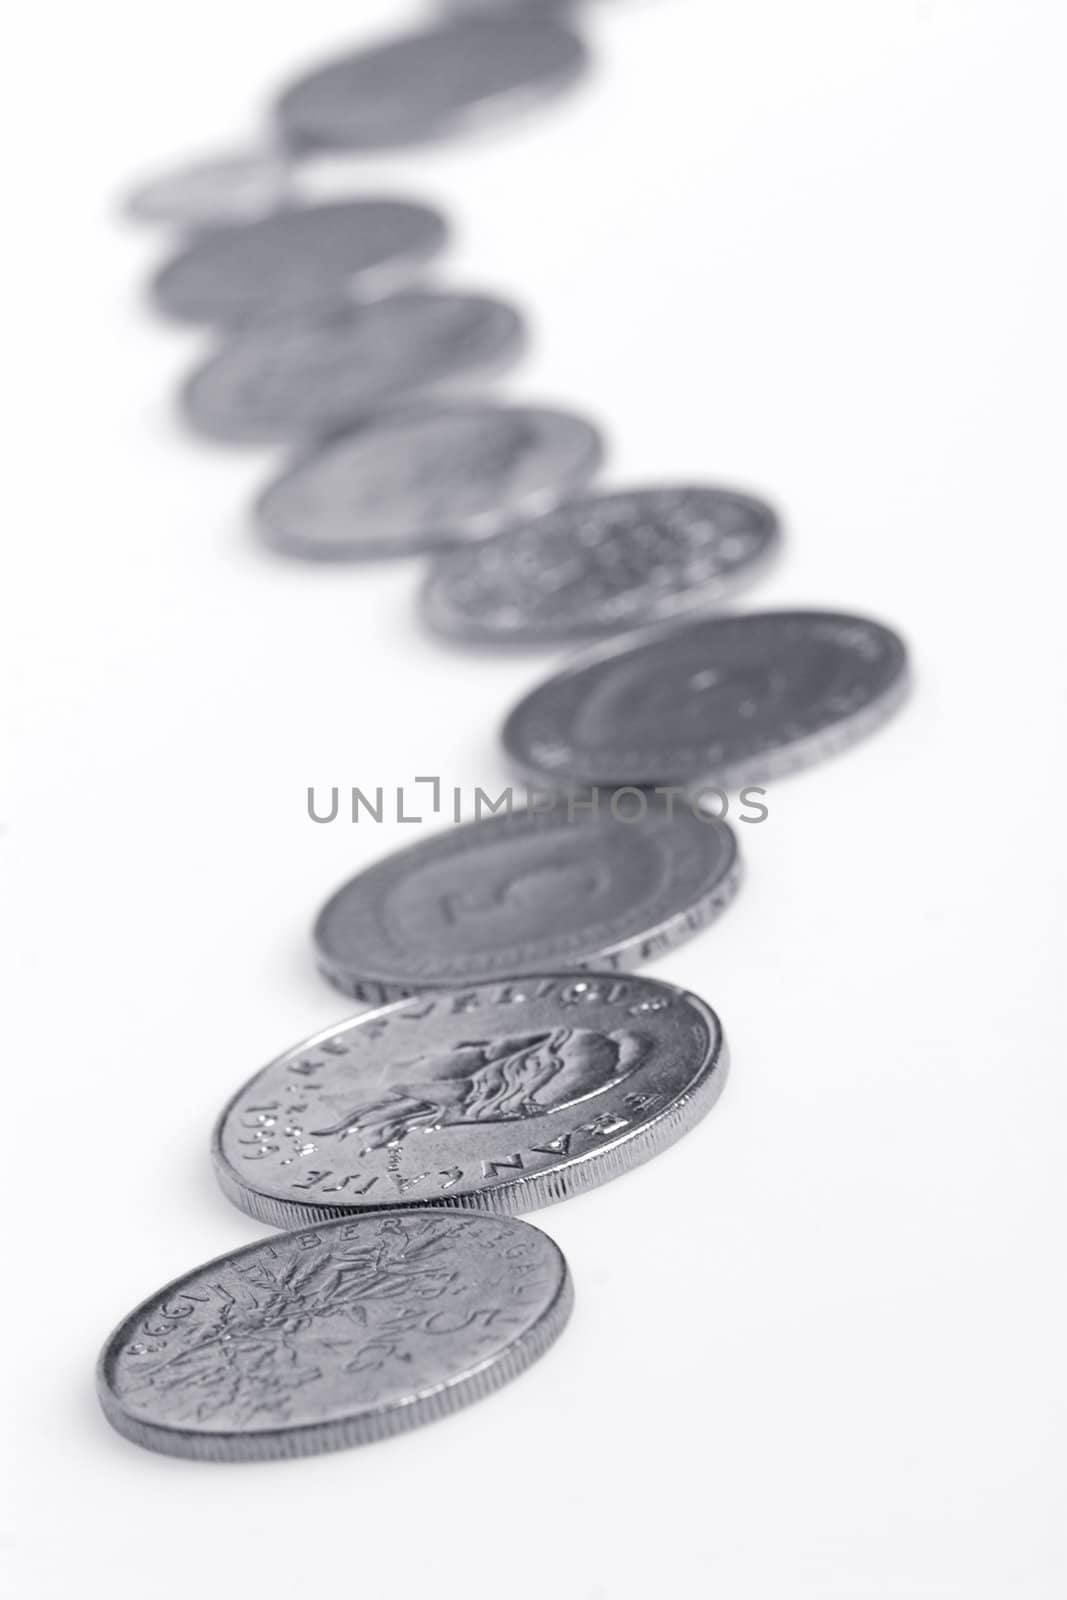 coinage, coins